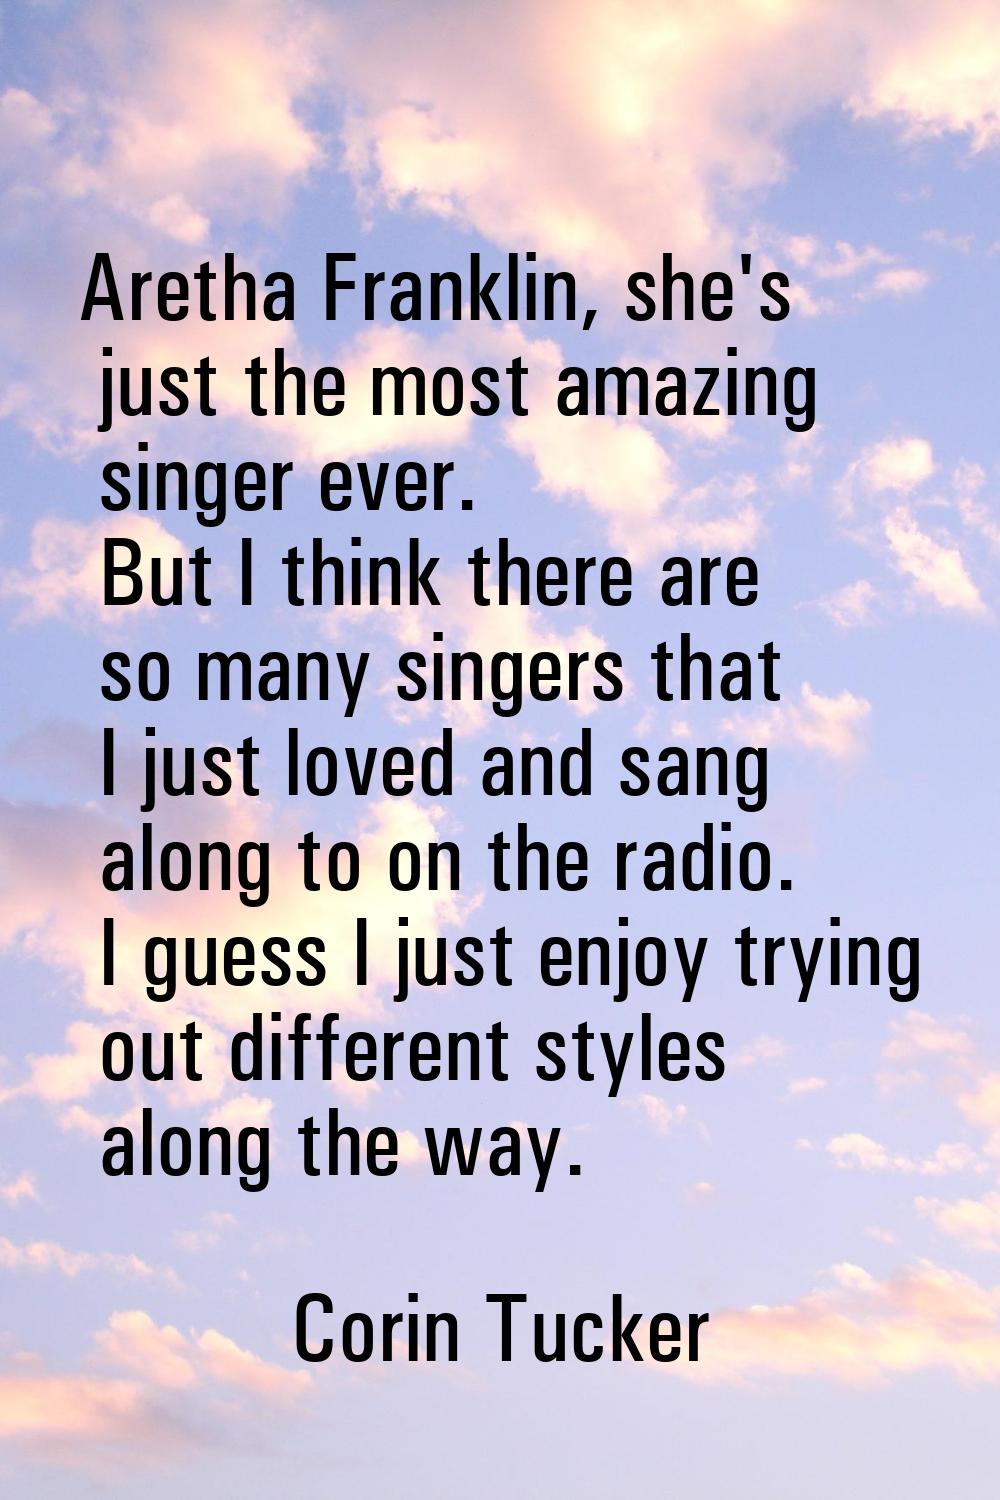 Aretha Franklin, she's just the most amazing singer ever. But I think there are so many singers tha